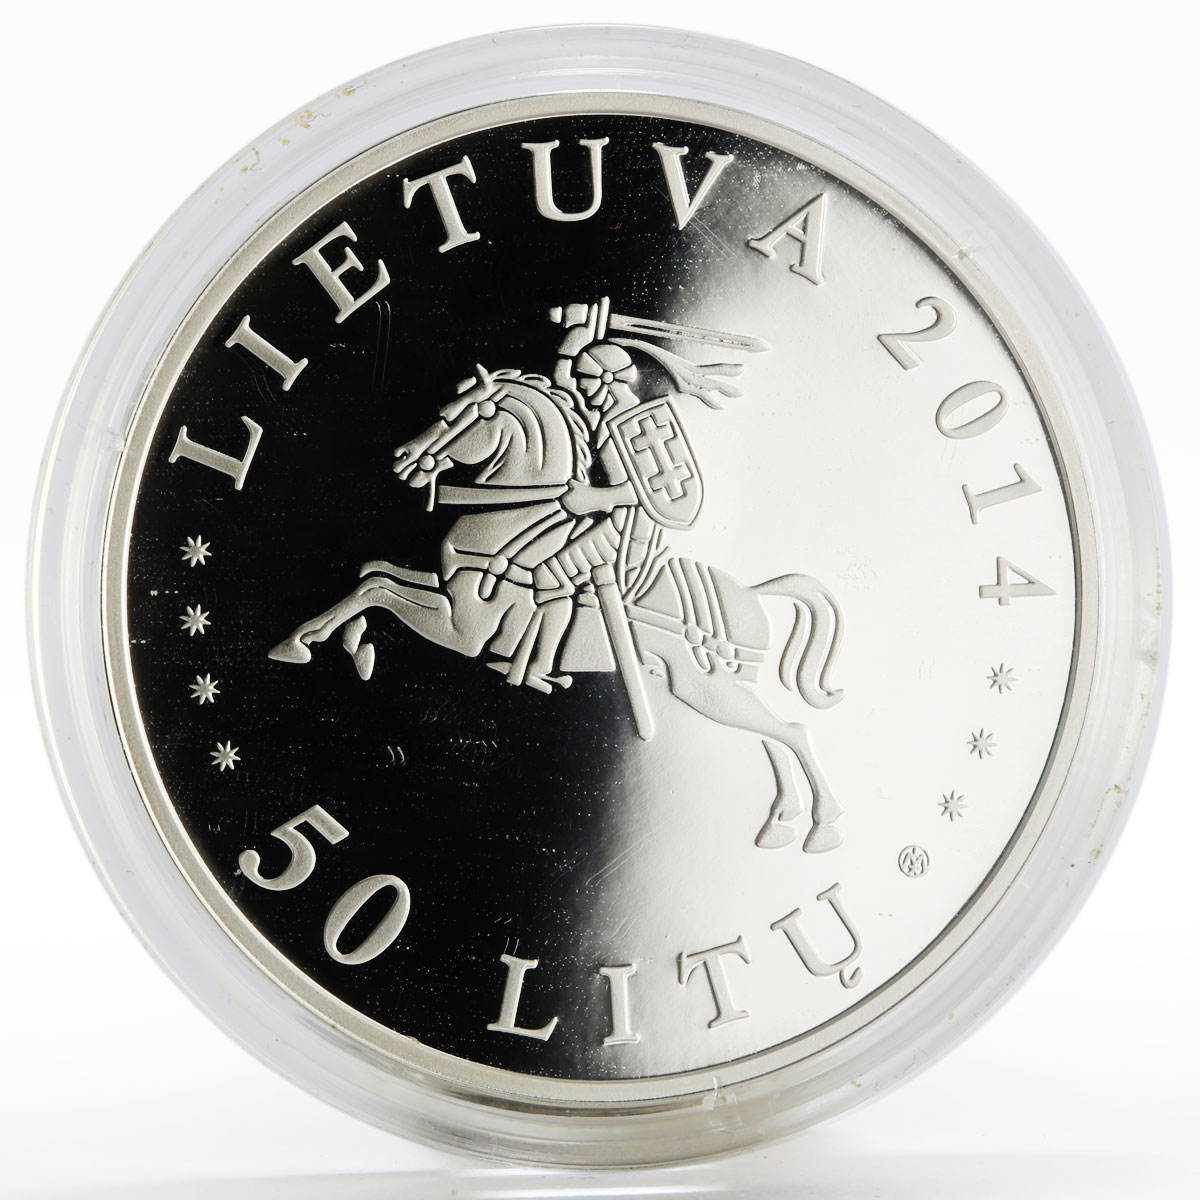 Lithuania 50 litu 25 Years of the Vytautas Magnus University silver coin 2014